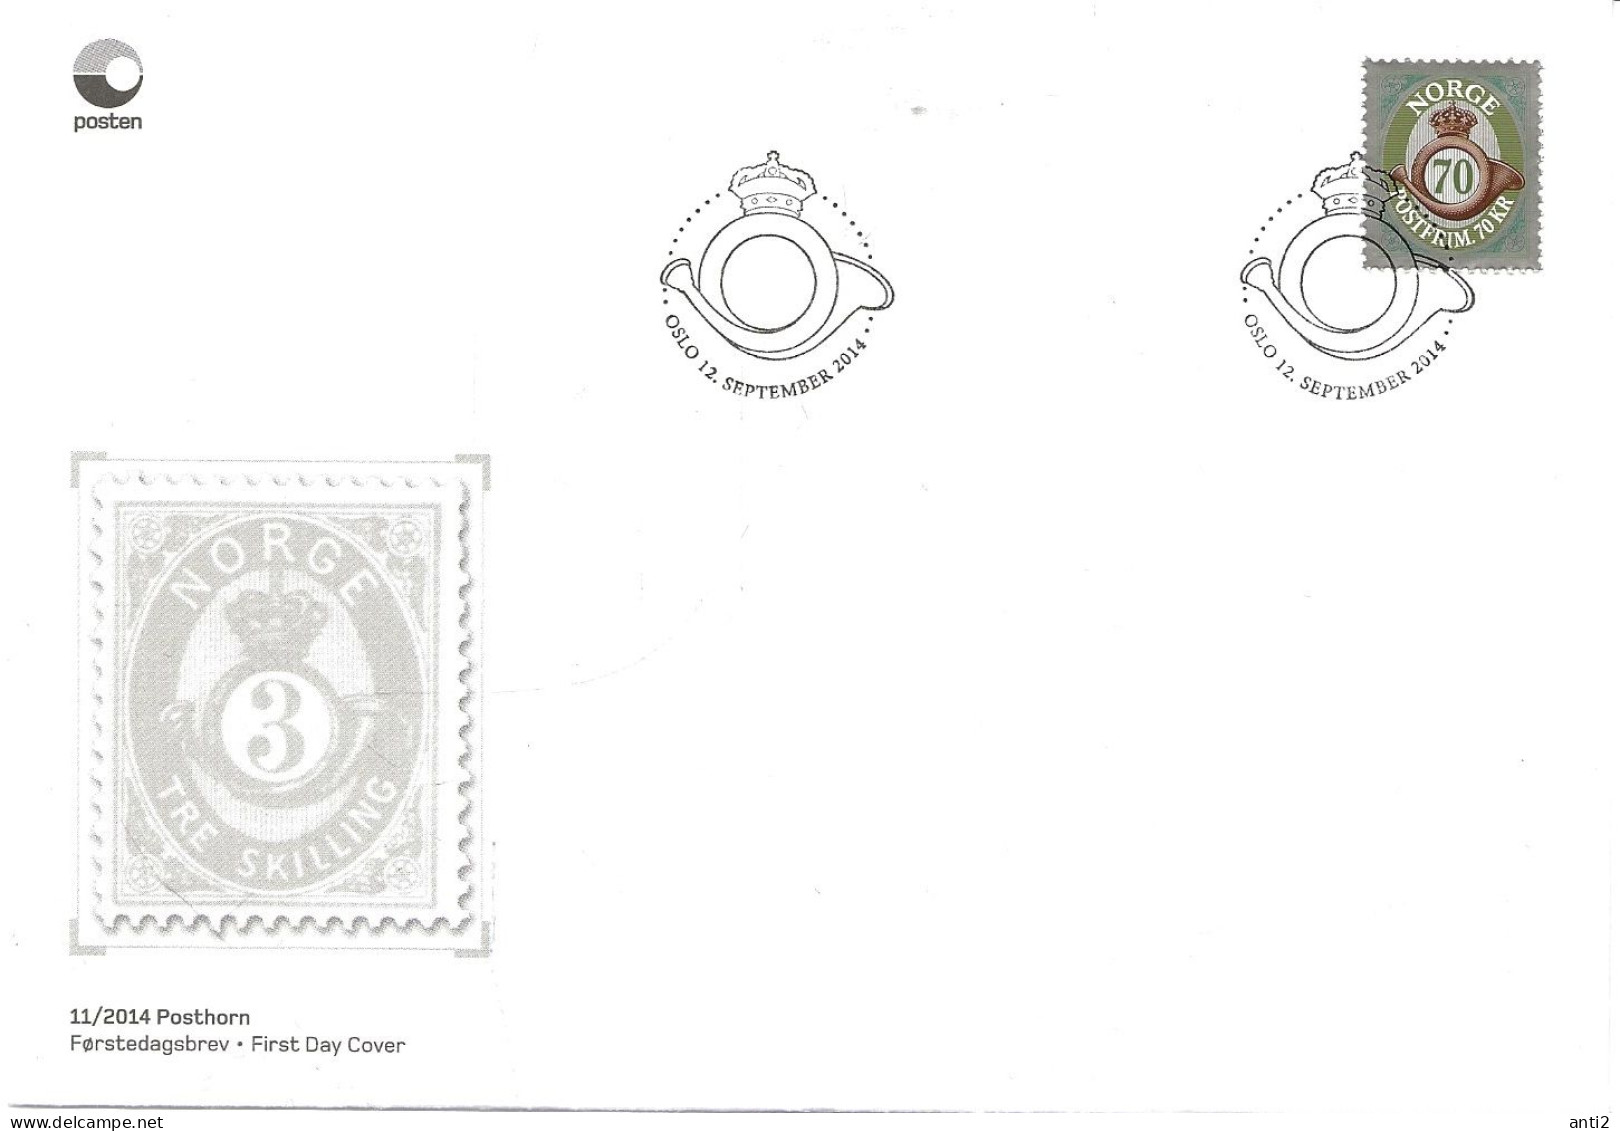 Norway 2014  Post Horn, 70 Kr  Mi 1865 FDC - Covers & Documents